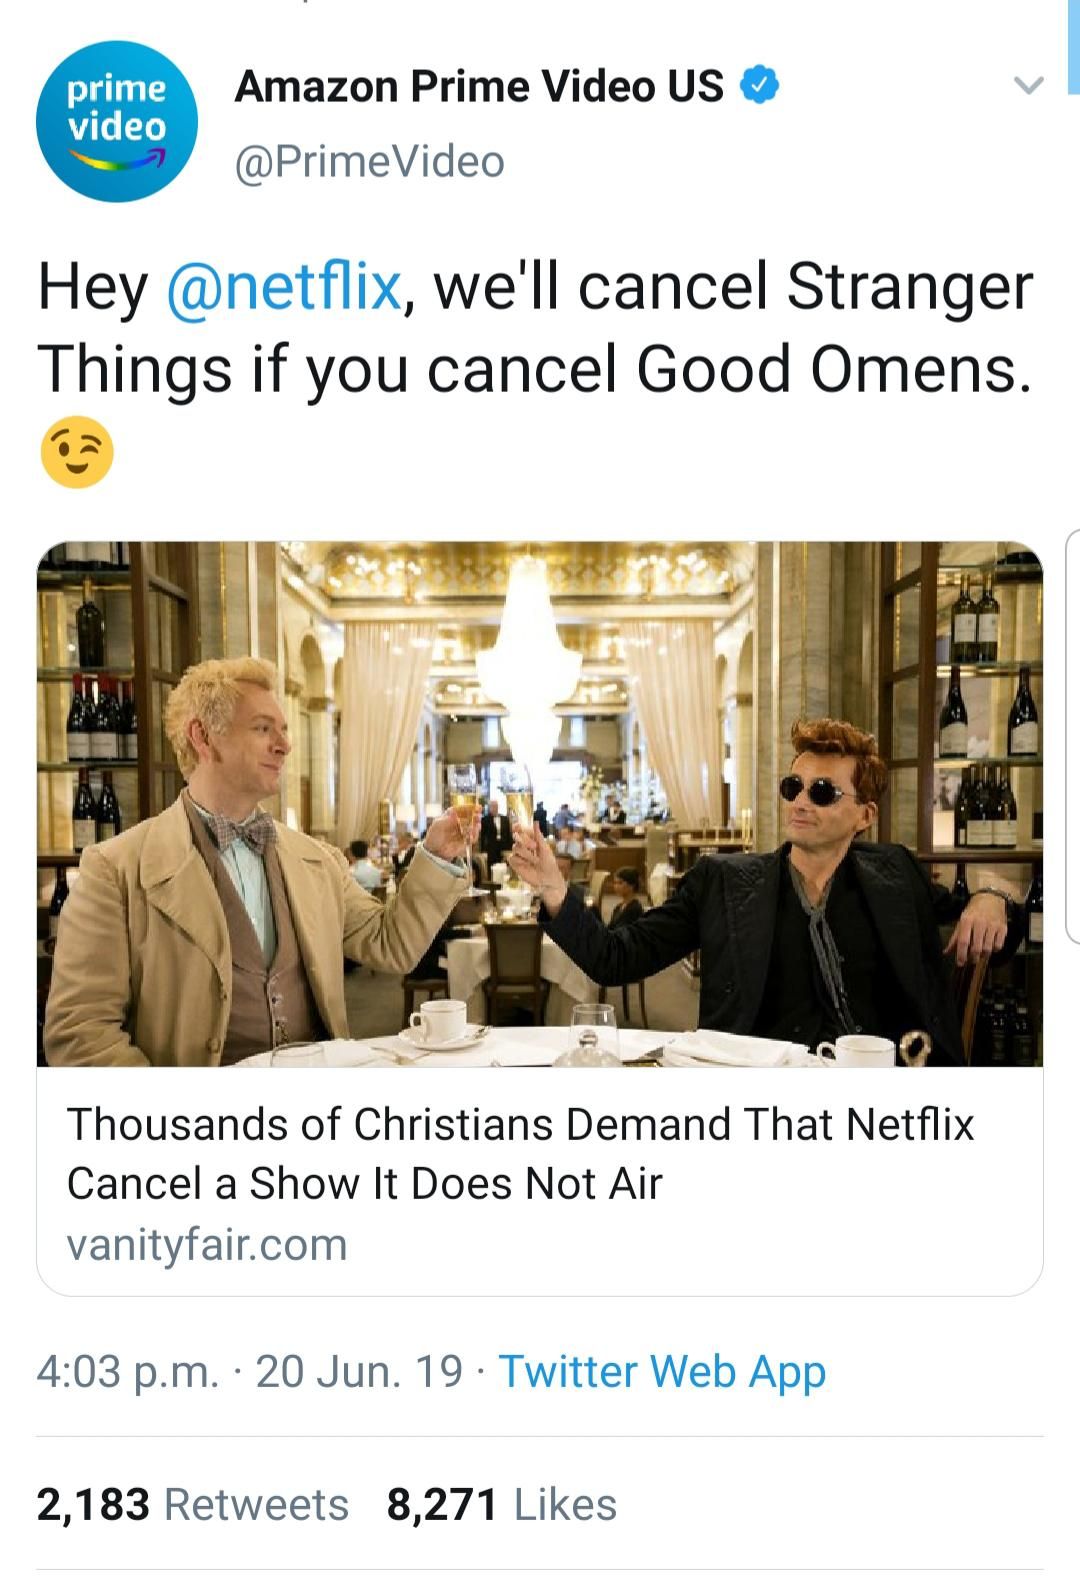 What say you Netflix?